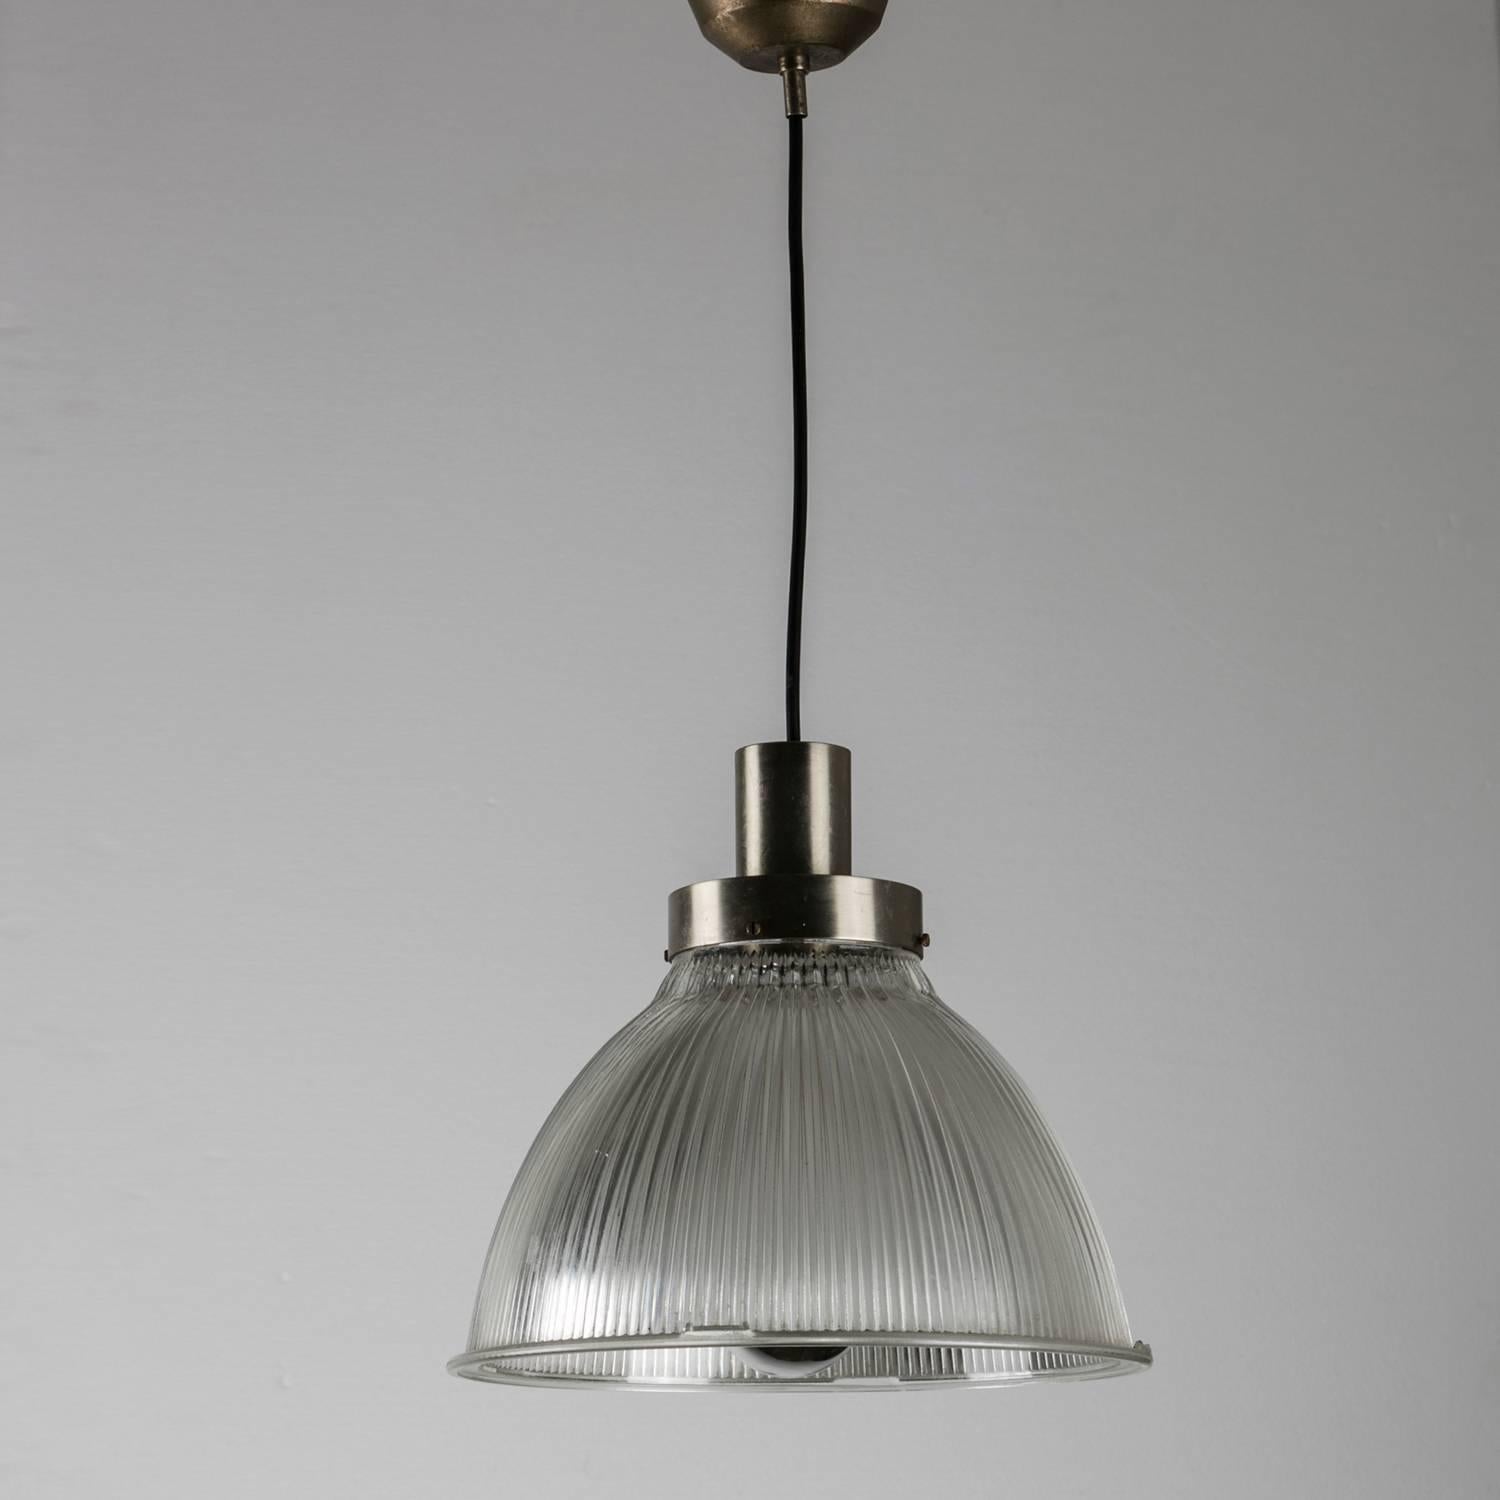 Italian Set of Two Pendant Lamps in the style of B.B.P.R. for Artemide, Italy, 1950s For Sale